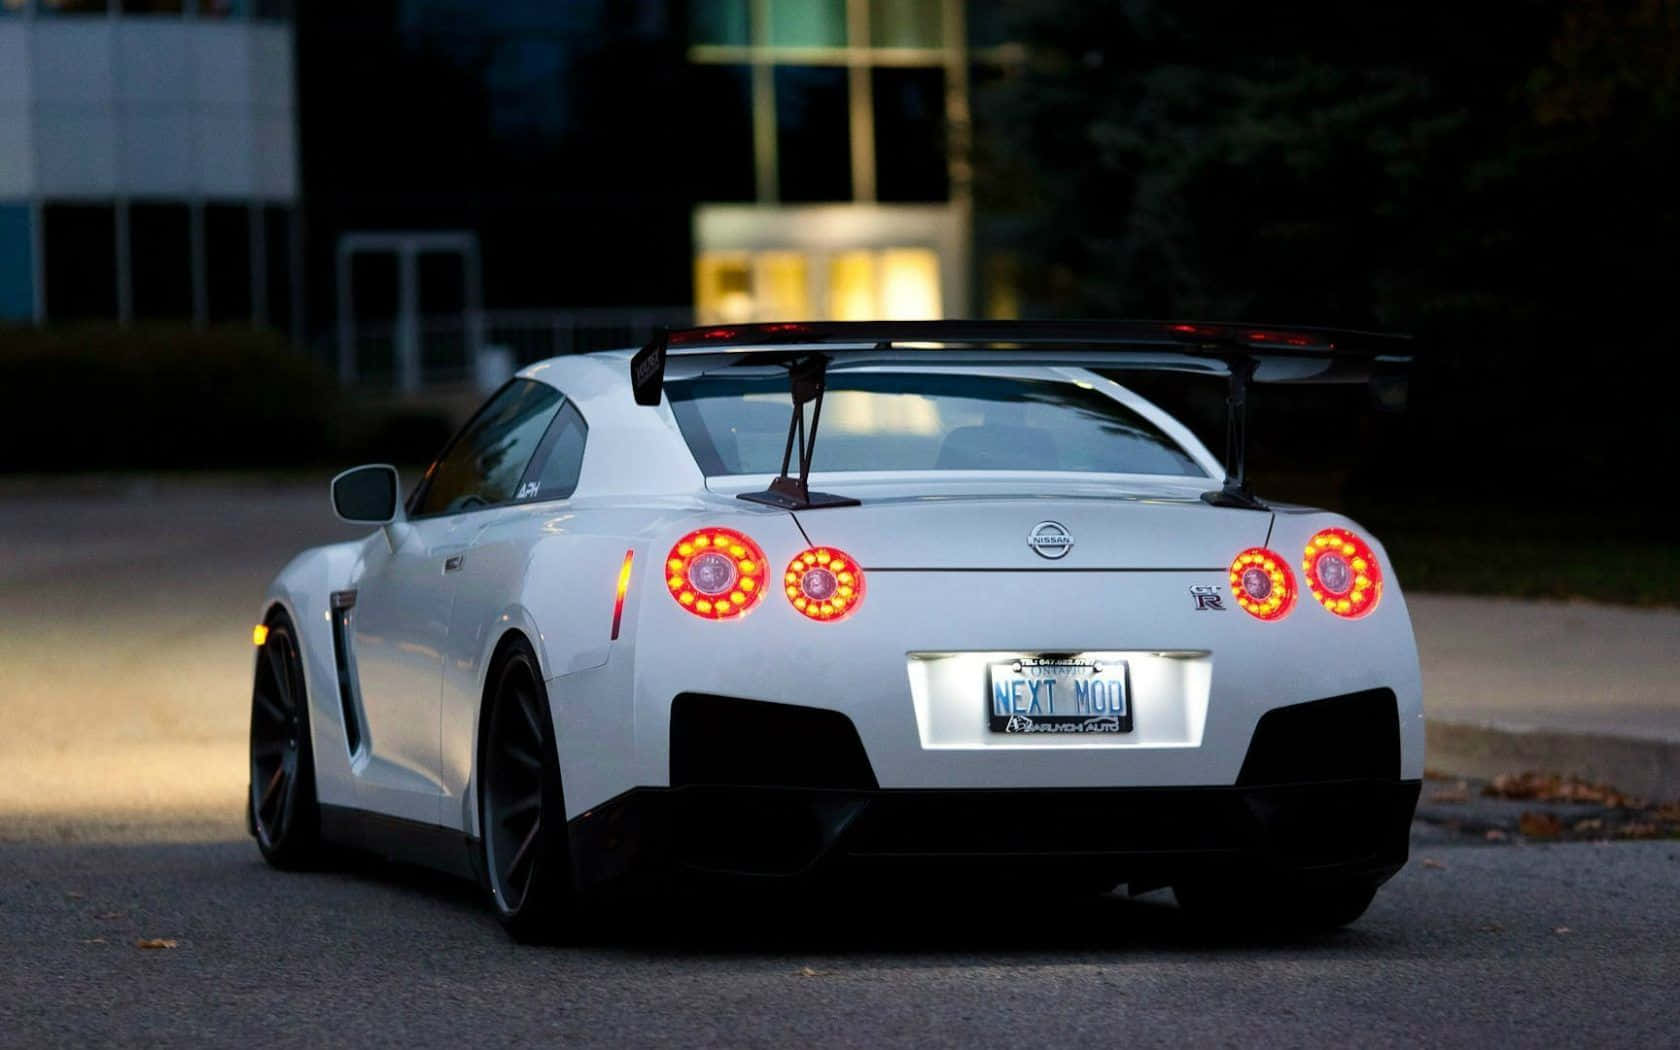 Envious Of The Cool Gtr On The Road Background